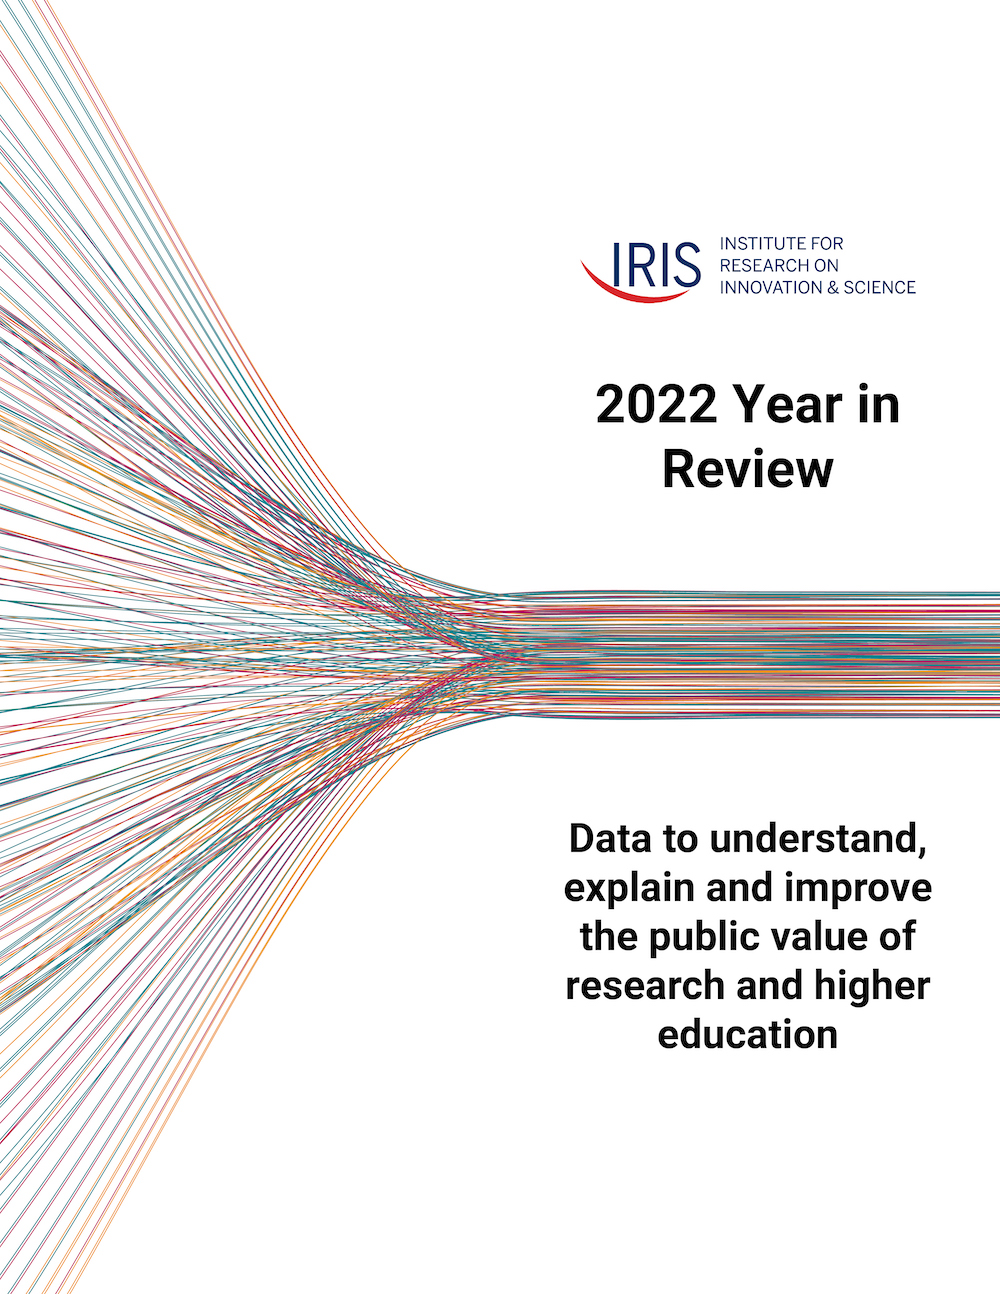 Cover of the 2022 Year in Review document